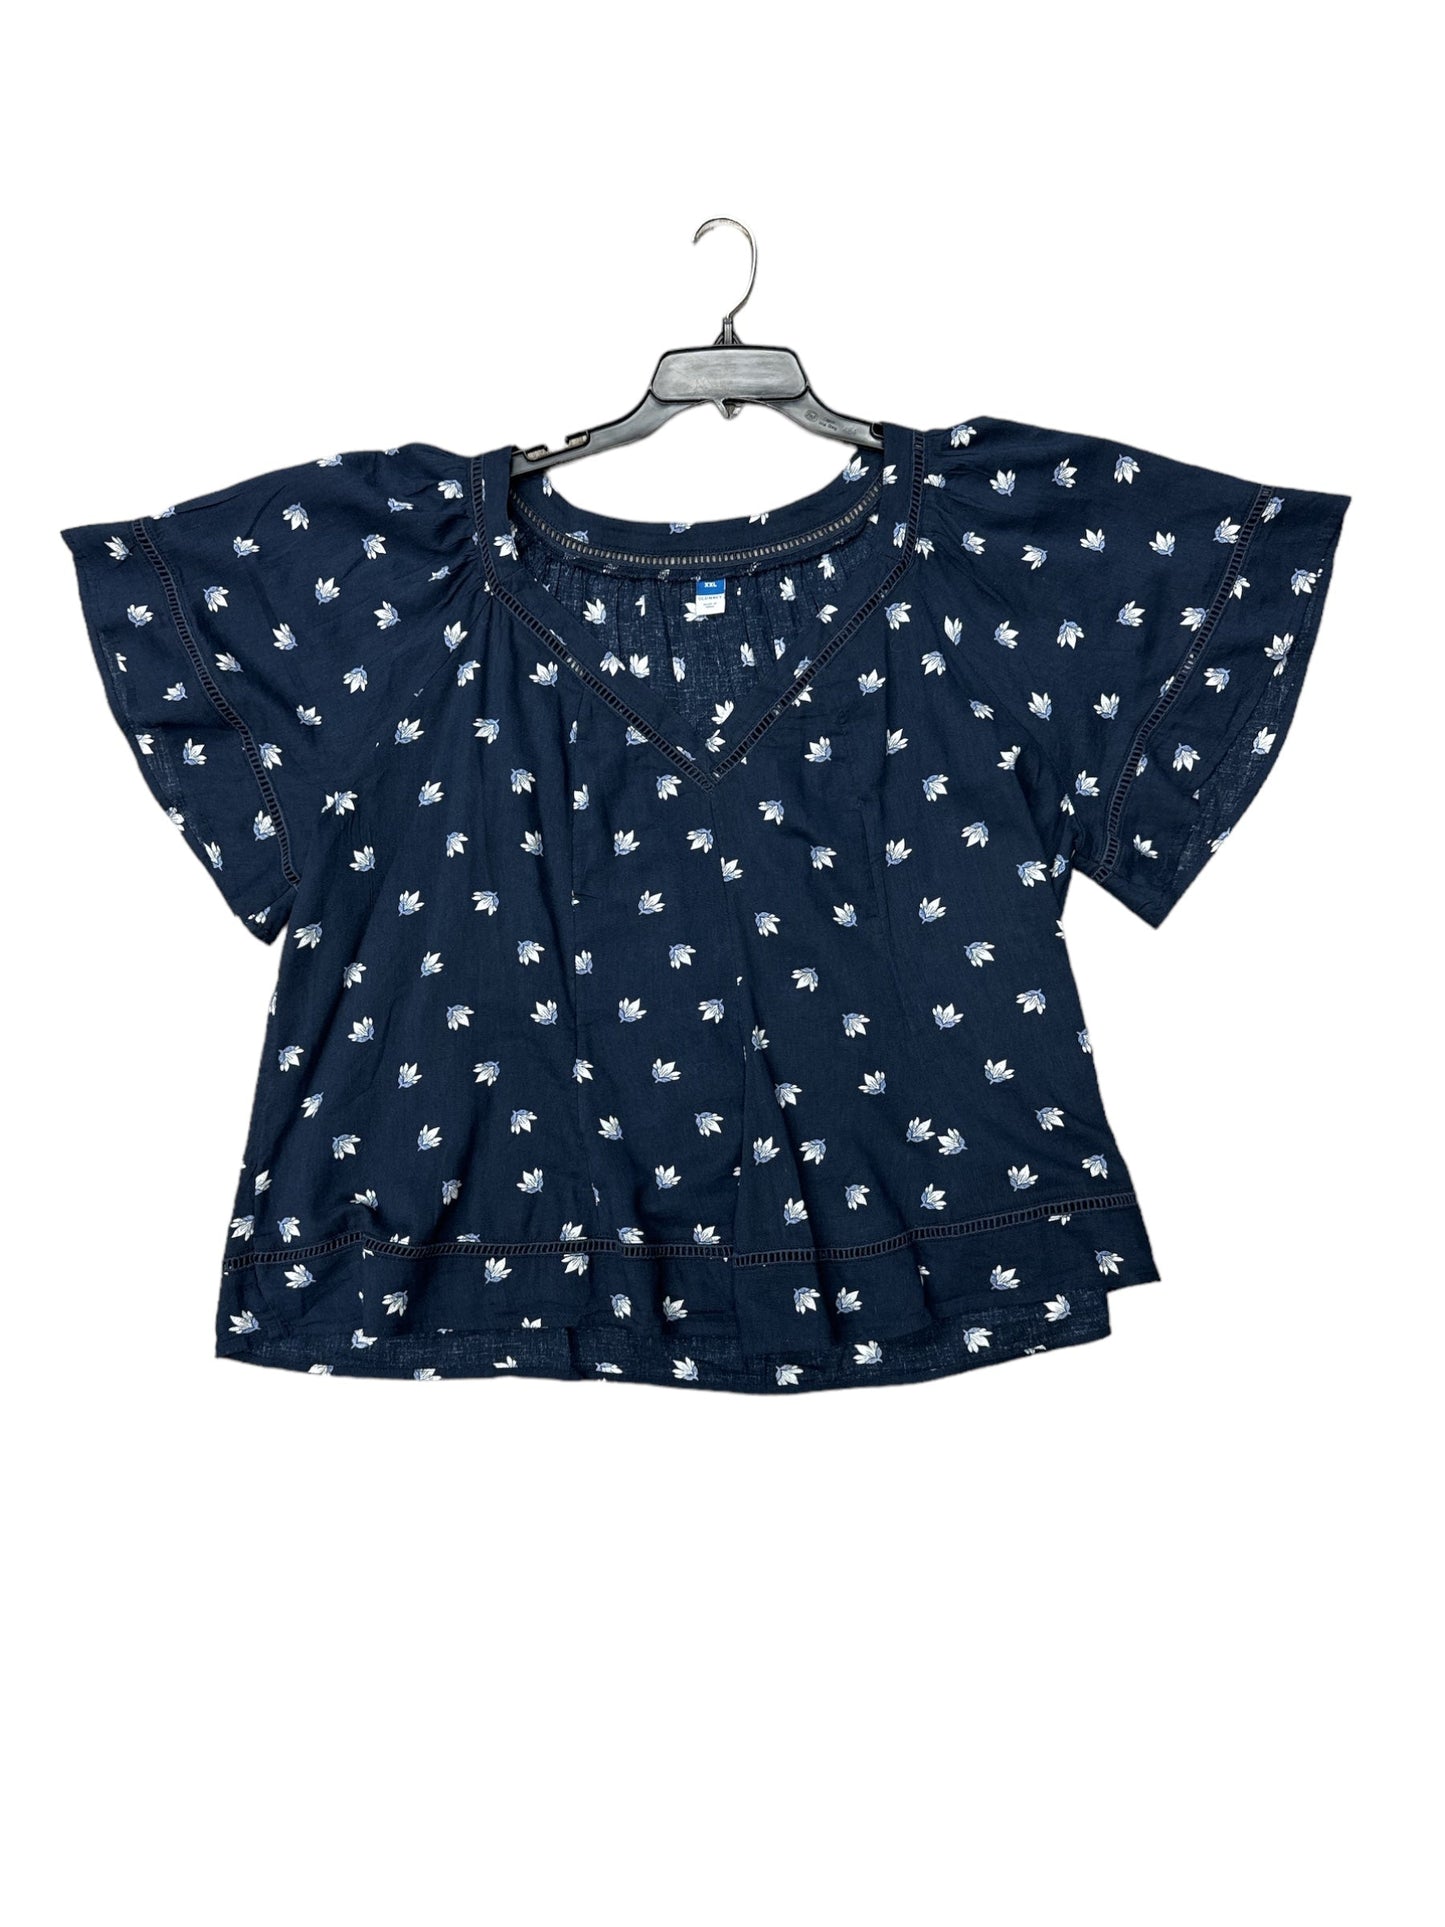 Navy Top Short Sleeve Old Navy, Size 2x